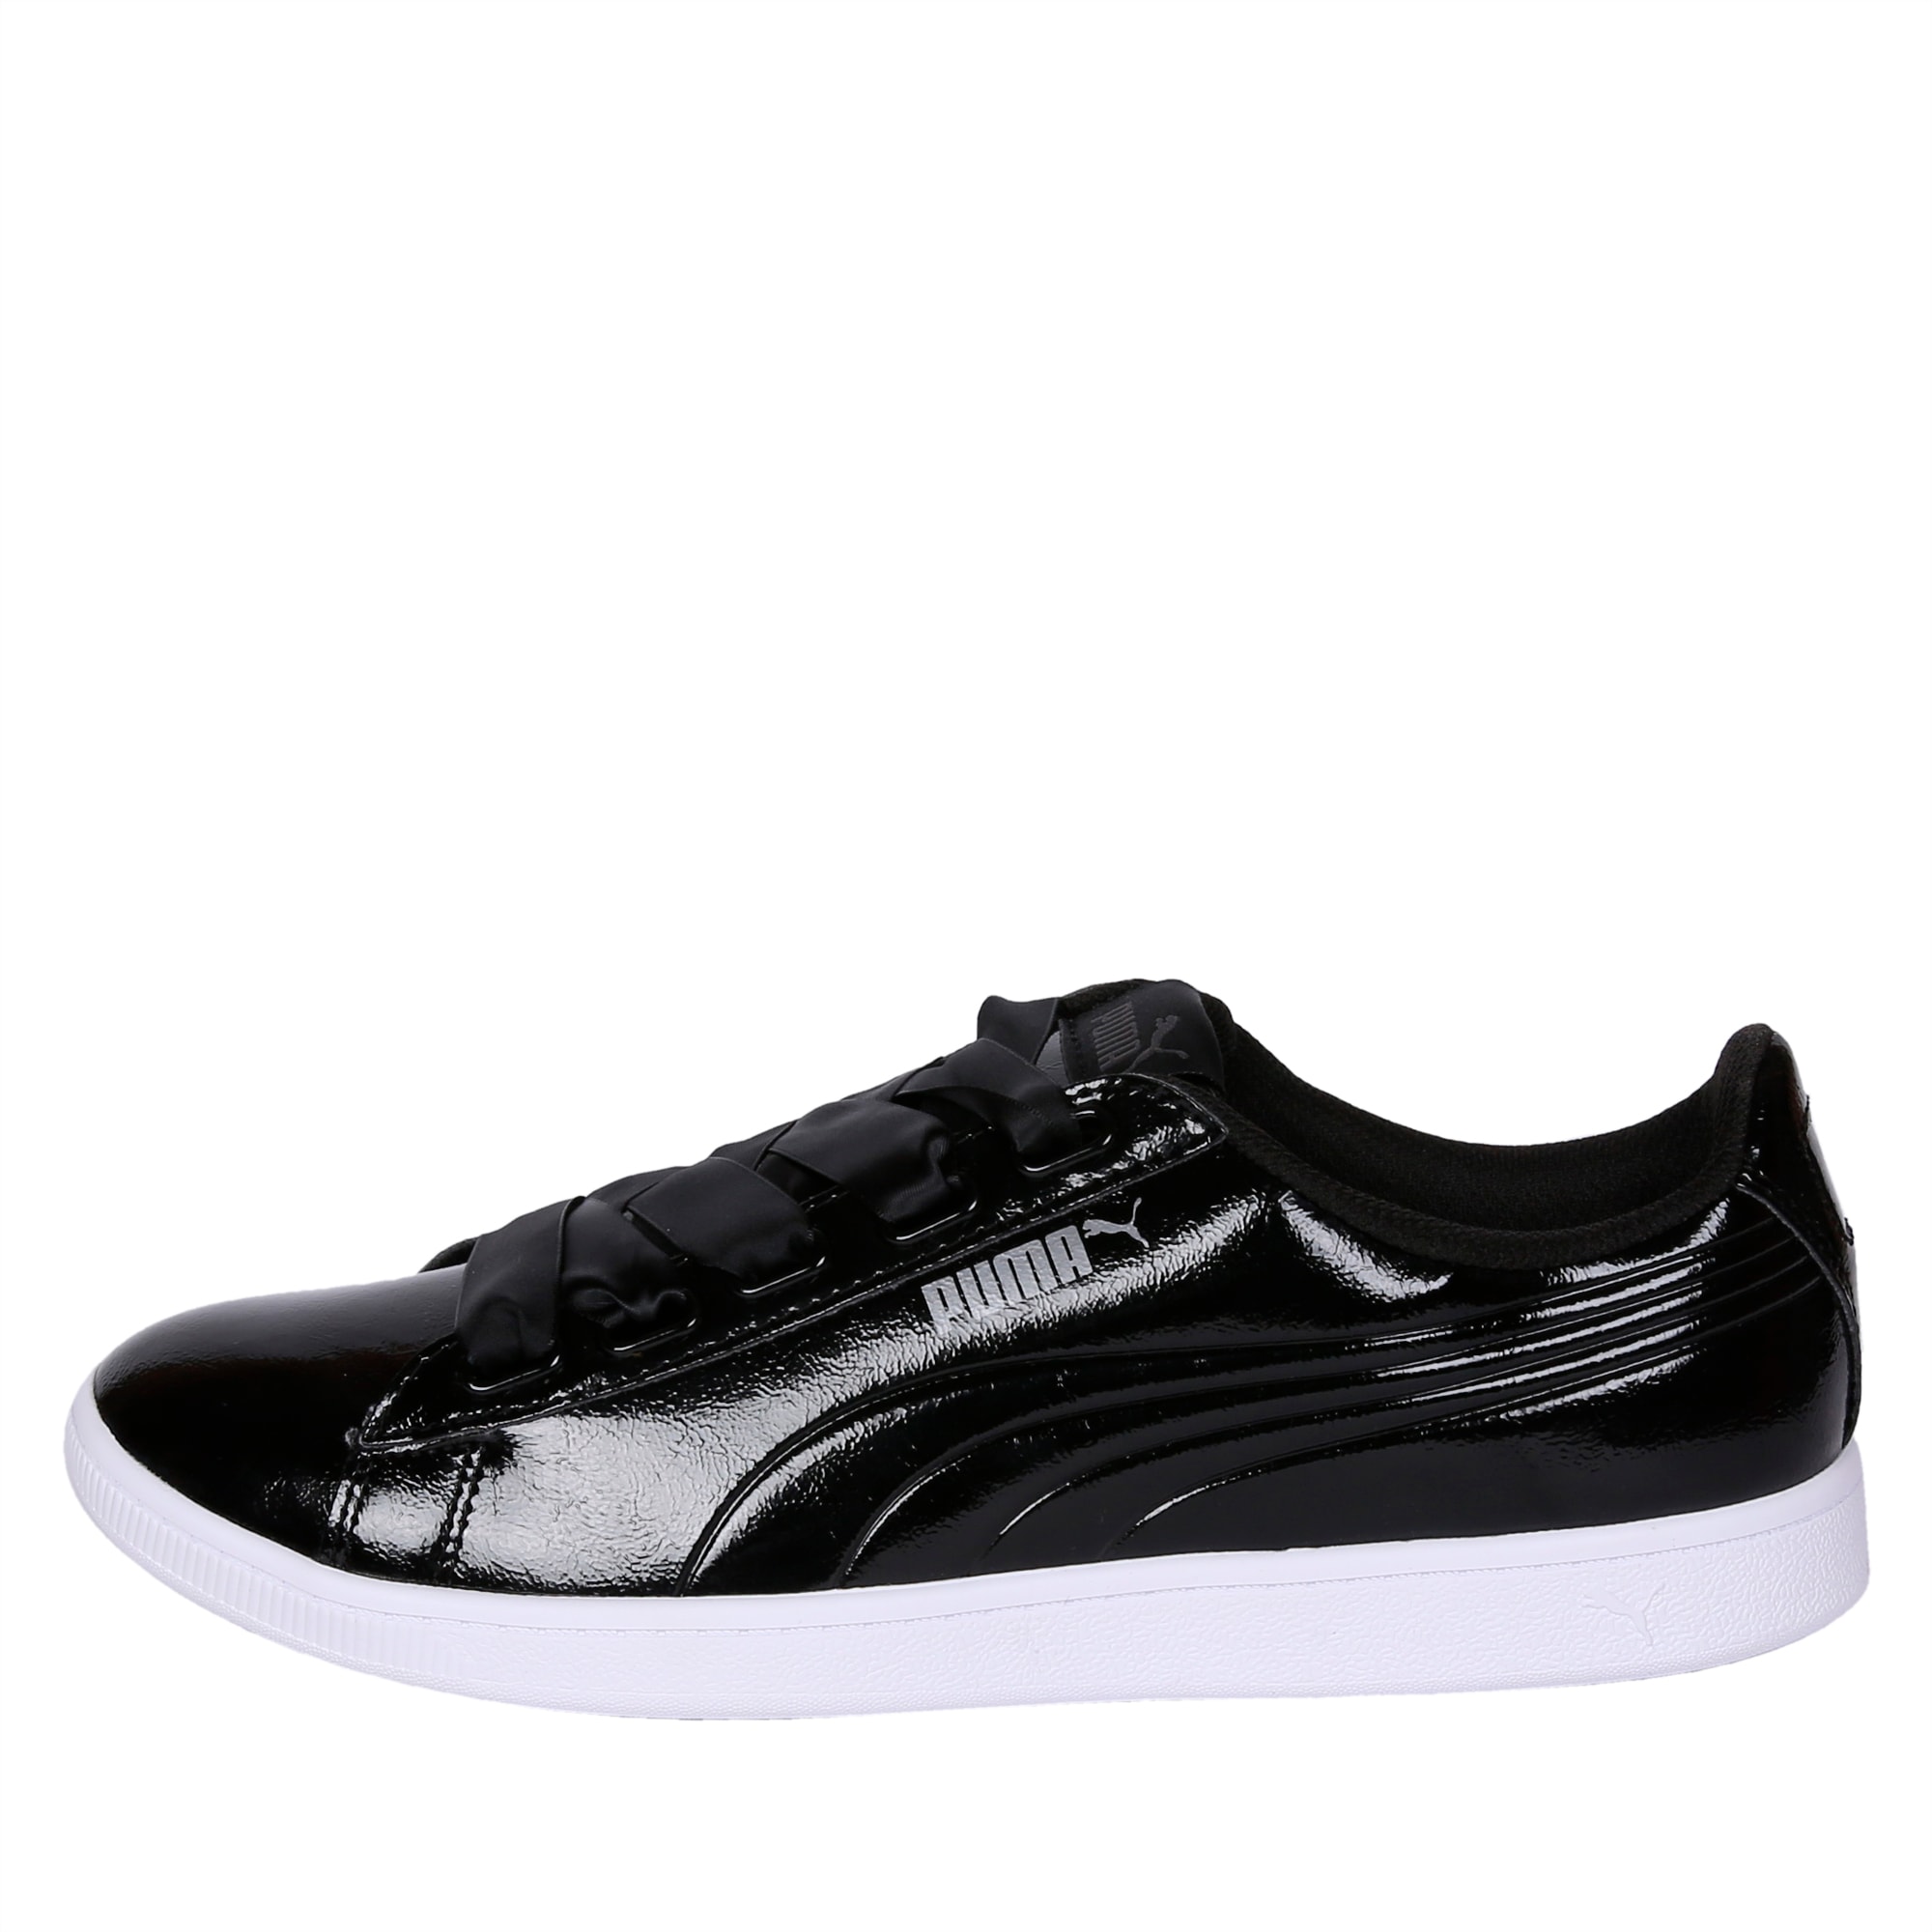 puma sneakers with ribbon